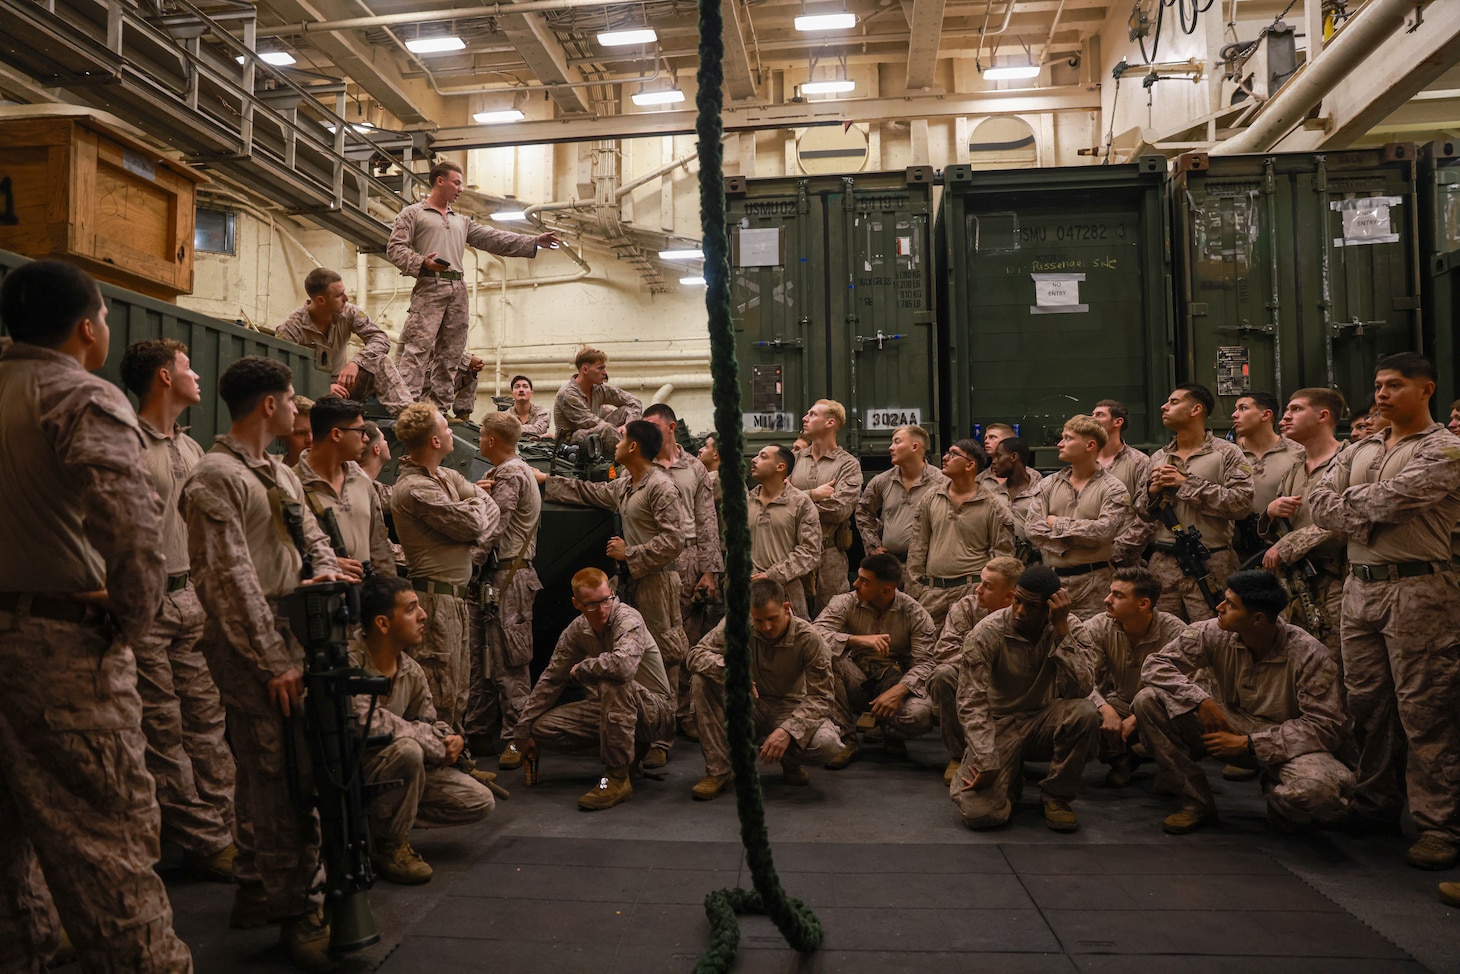 U.S. Marines assigned to Charlie Company, Battalion Landing Team 1/5, 15th Marine Expeditionary Unit, participate in a safety brief prior to fast-rope training aboard the amphibious transport dock USS Somerset (LPD 25) during Exercise Tiger TRIUMPH in Visakhapatnam, India, March 20, 2024. Tiger TRIUMPH is a U.S.-India tri-service amphibious exercise focused on humanitarian assistance and disaster relief readiness and interoperability. Tiger TRIUMPH enables U.S. and Indian Armed Forces to improve interoperability and bilateral, joint, and service readiness in the Indian Ocean region and beyond to better achieve mutual regional security objectives. (U.S. Marine Corps photo by Cpl. Aidan Hekker)